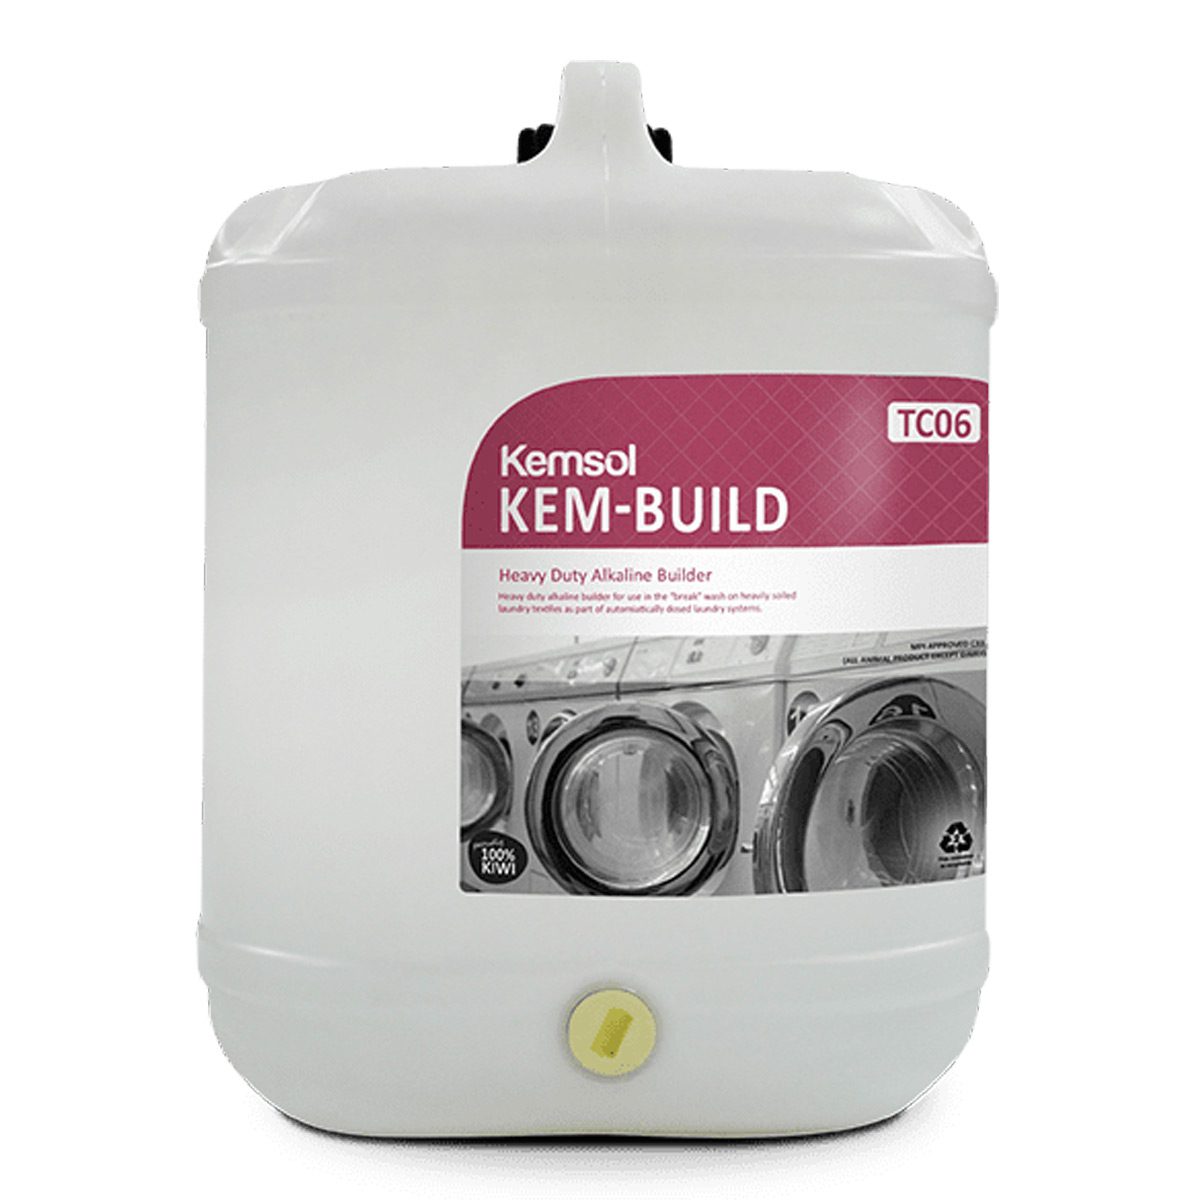 cleaning-products-laundry-kemsol-kembuild-laundry-builder-20L-litre-heavy-duty-alkaline-builder for-use-in-break-wash-heavily-soiled-laundry-textiles-automatically-dosed-laundry-vjs-distributors-KKEMB